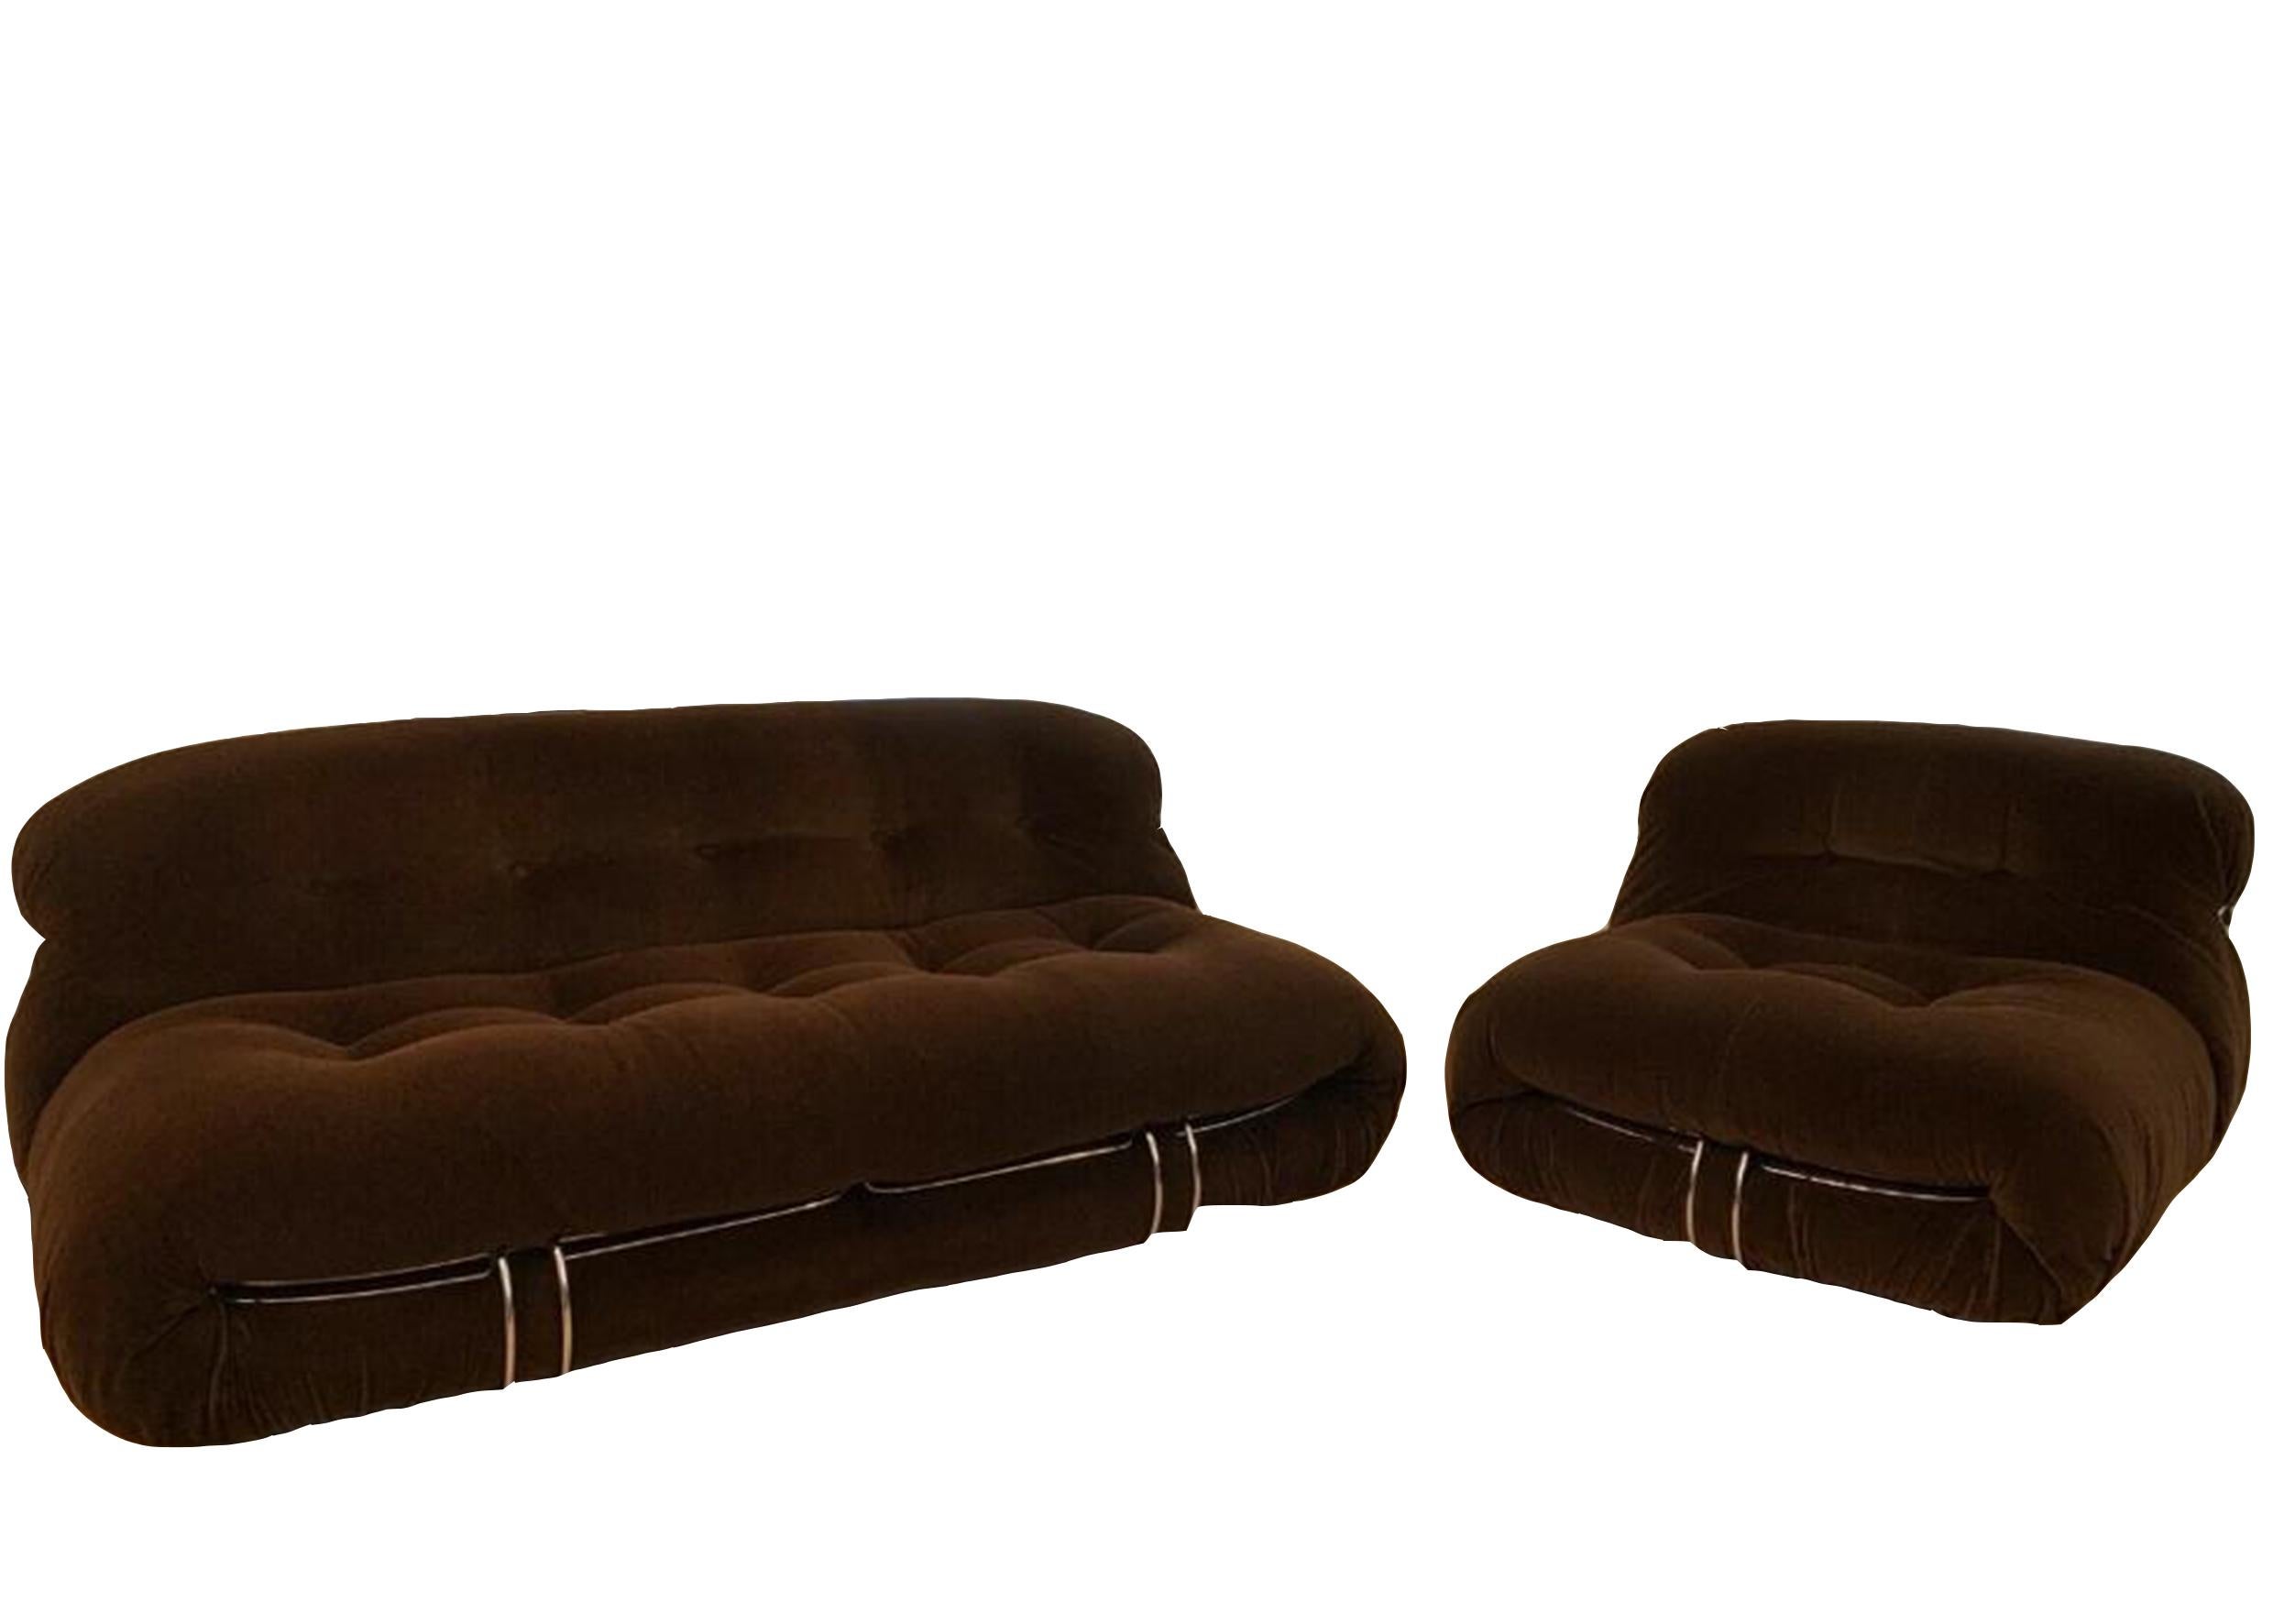 Exquisite Soriana set with a two-seat Soriana sofa, two armchairs and one ottoman with a chromed metal structure and upholstered in dark brown velvet. 
Designed by Tobia and Afra Scarpa for Cassina, 1970, Italy. 

Measurements: H 65 x Seat H 38 x